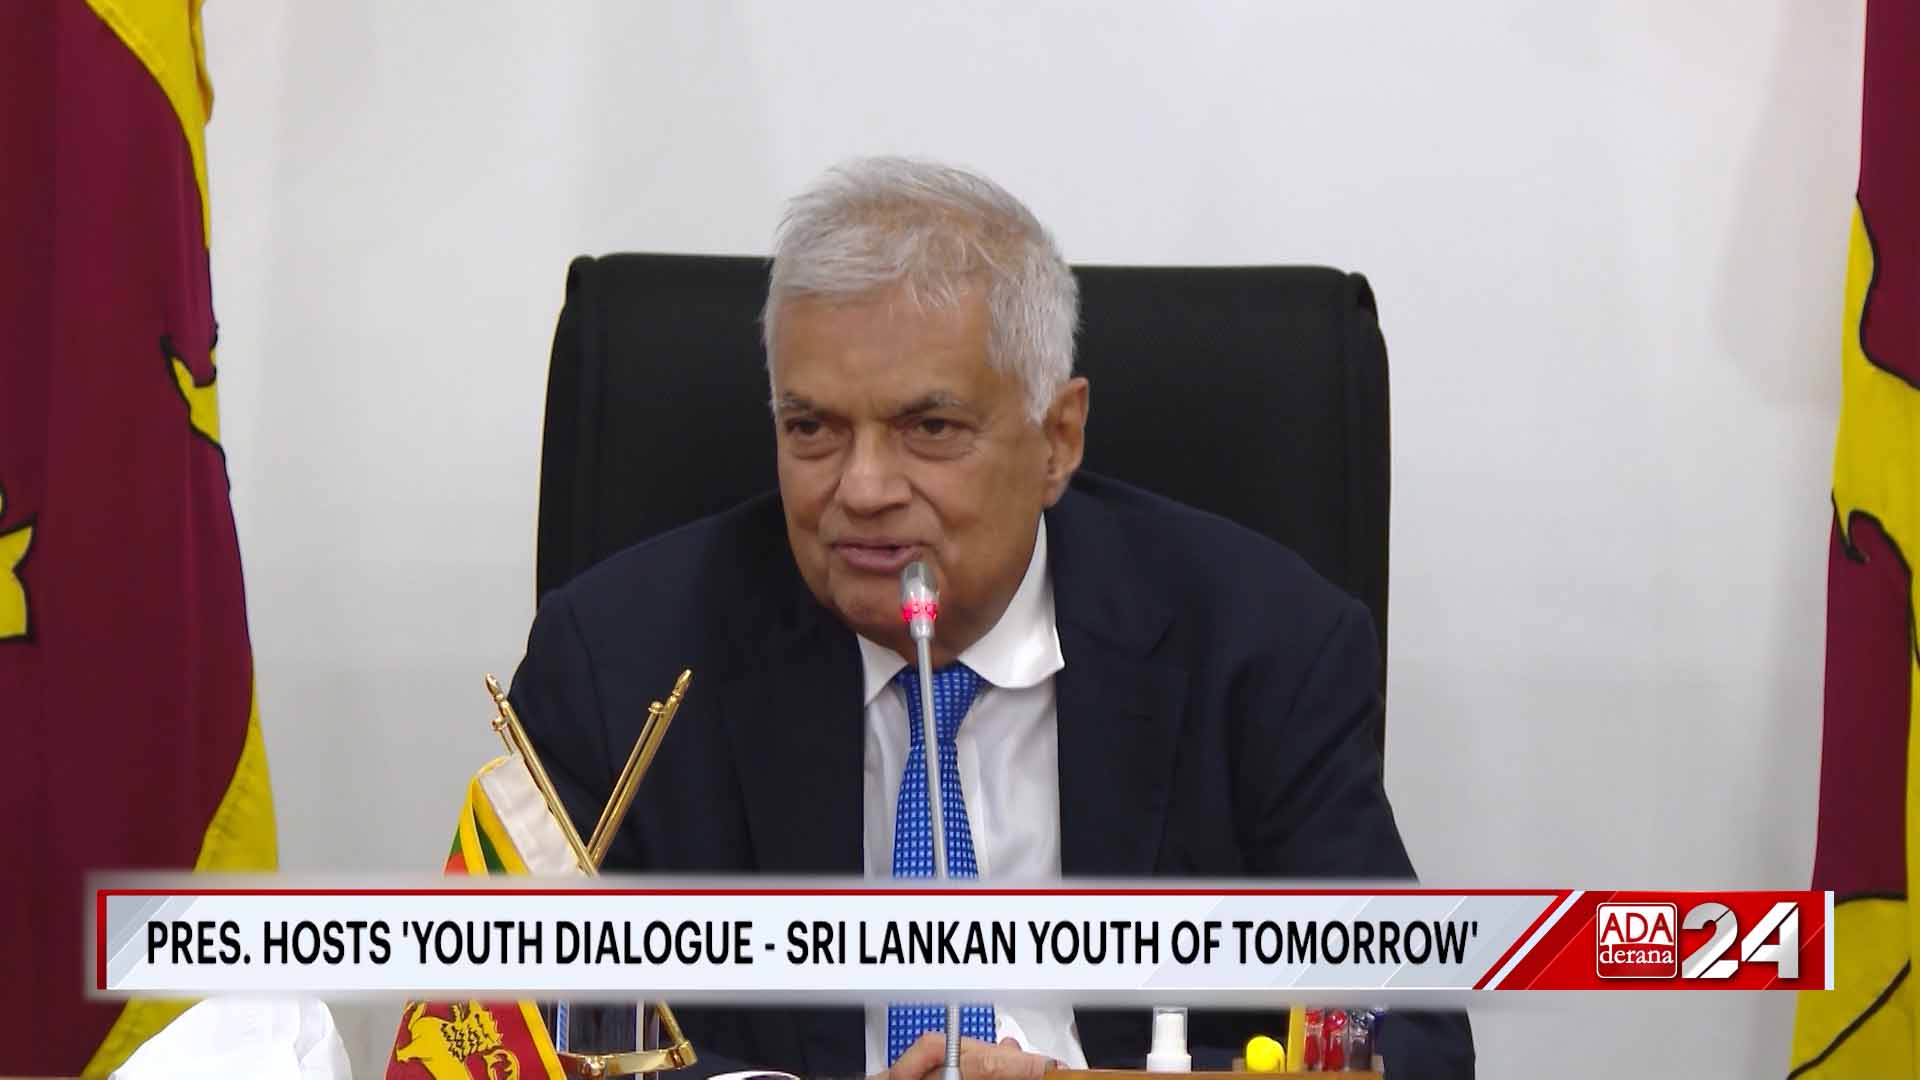 Sri Lanka will face a far worse crisis if debt is not settled - President (English)